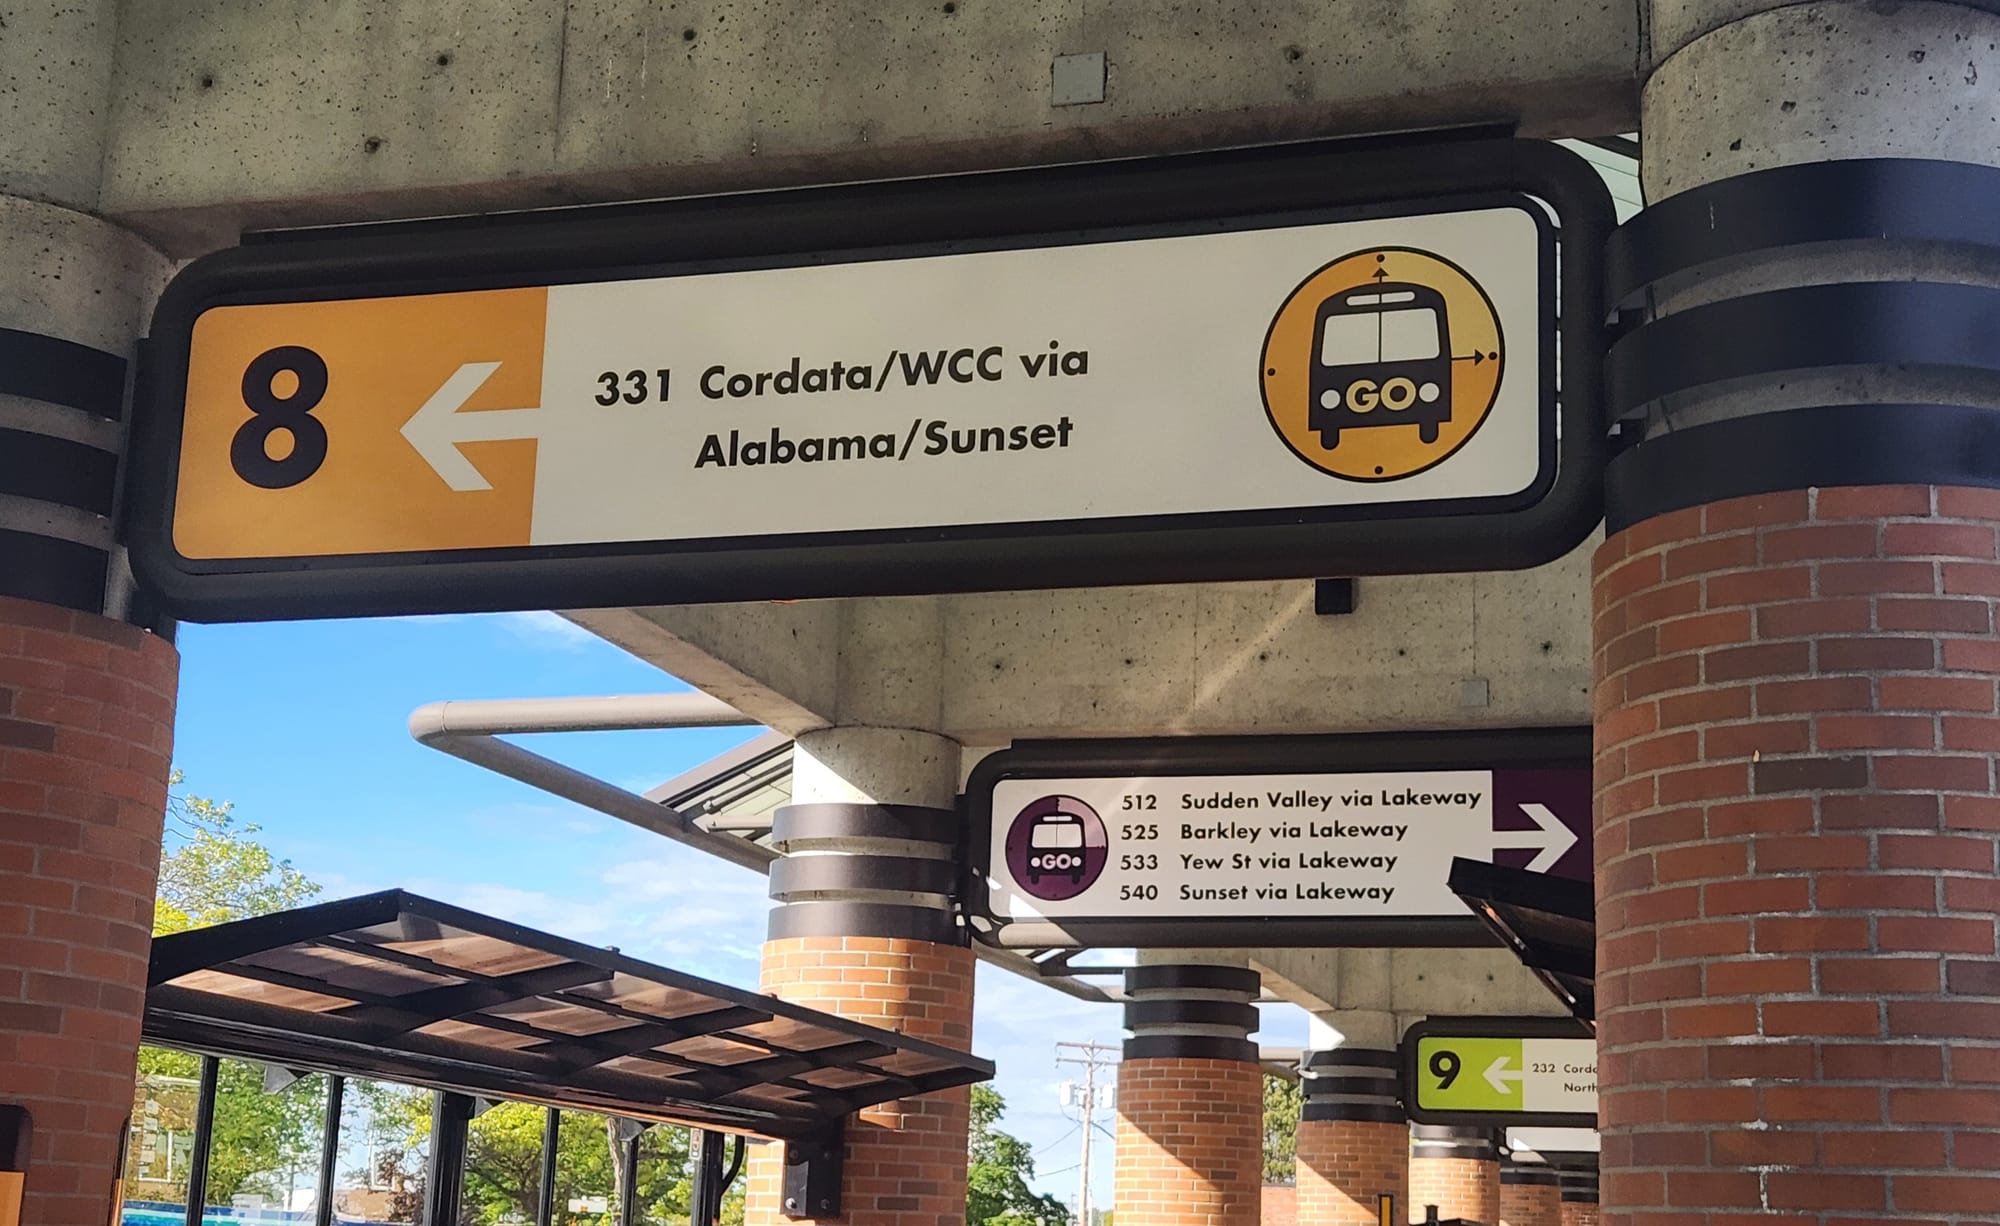 Numbered bus bays are clearly marked with route numbers and destinations at Bellingham Station, the hub of the WTA bus network. 